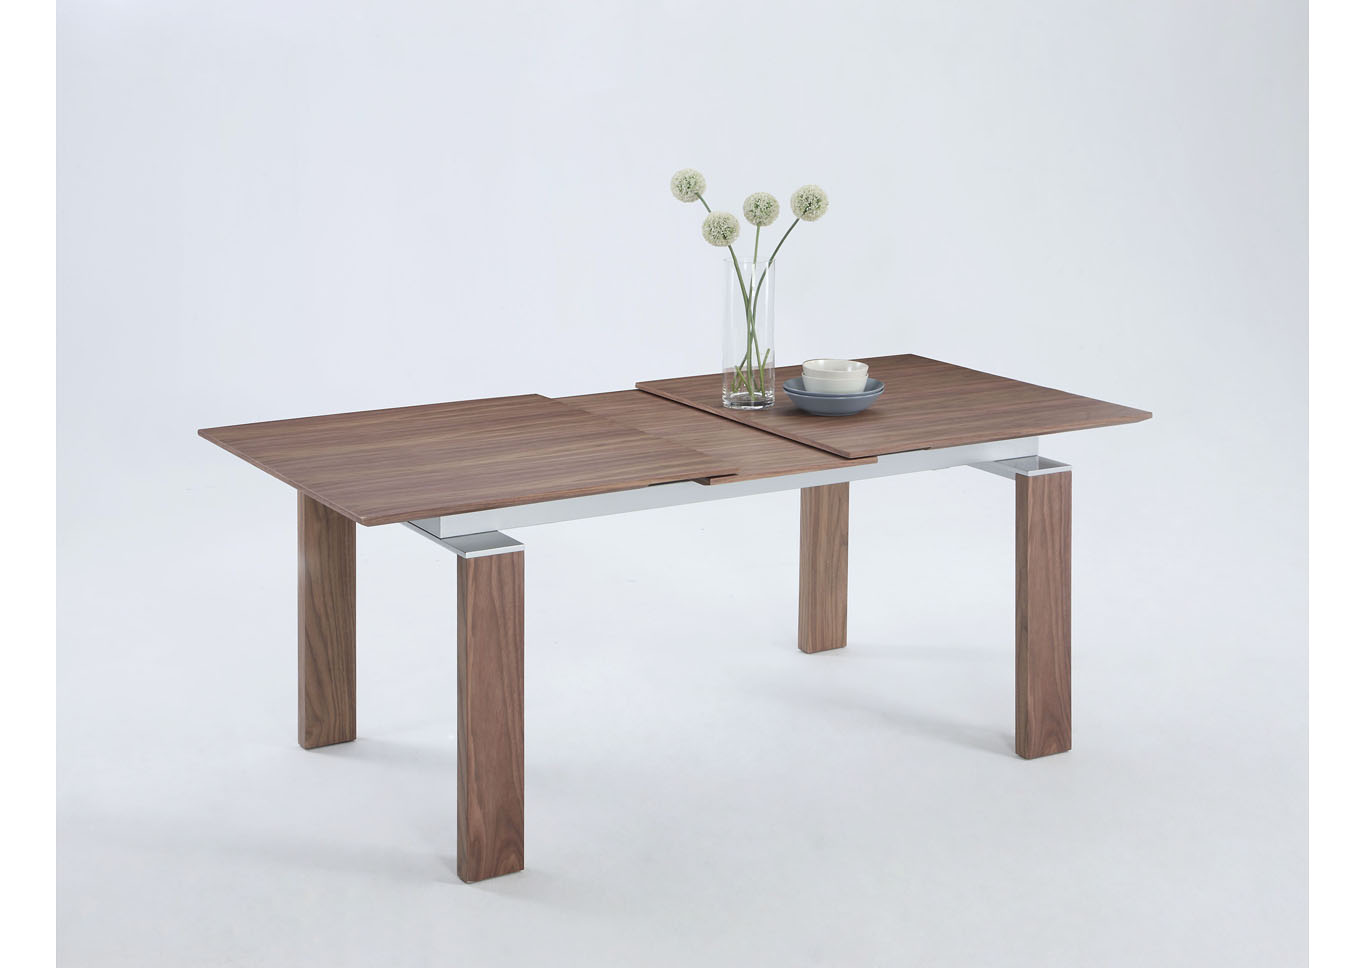 Brittany Walnut Wood Pop-Up Table w/ 1 Extension 63x 79,Chintaly Imports